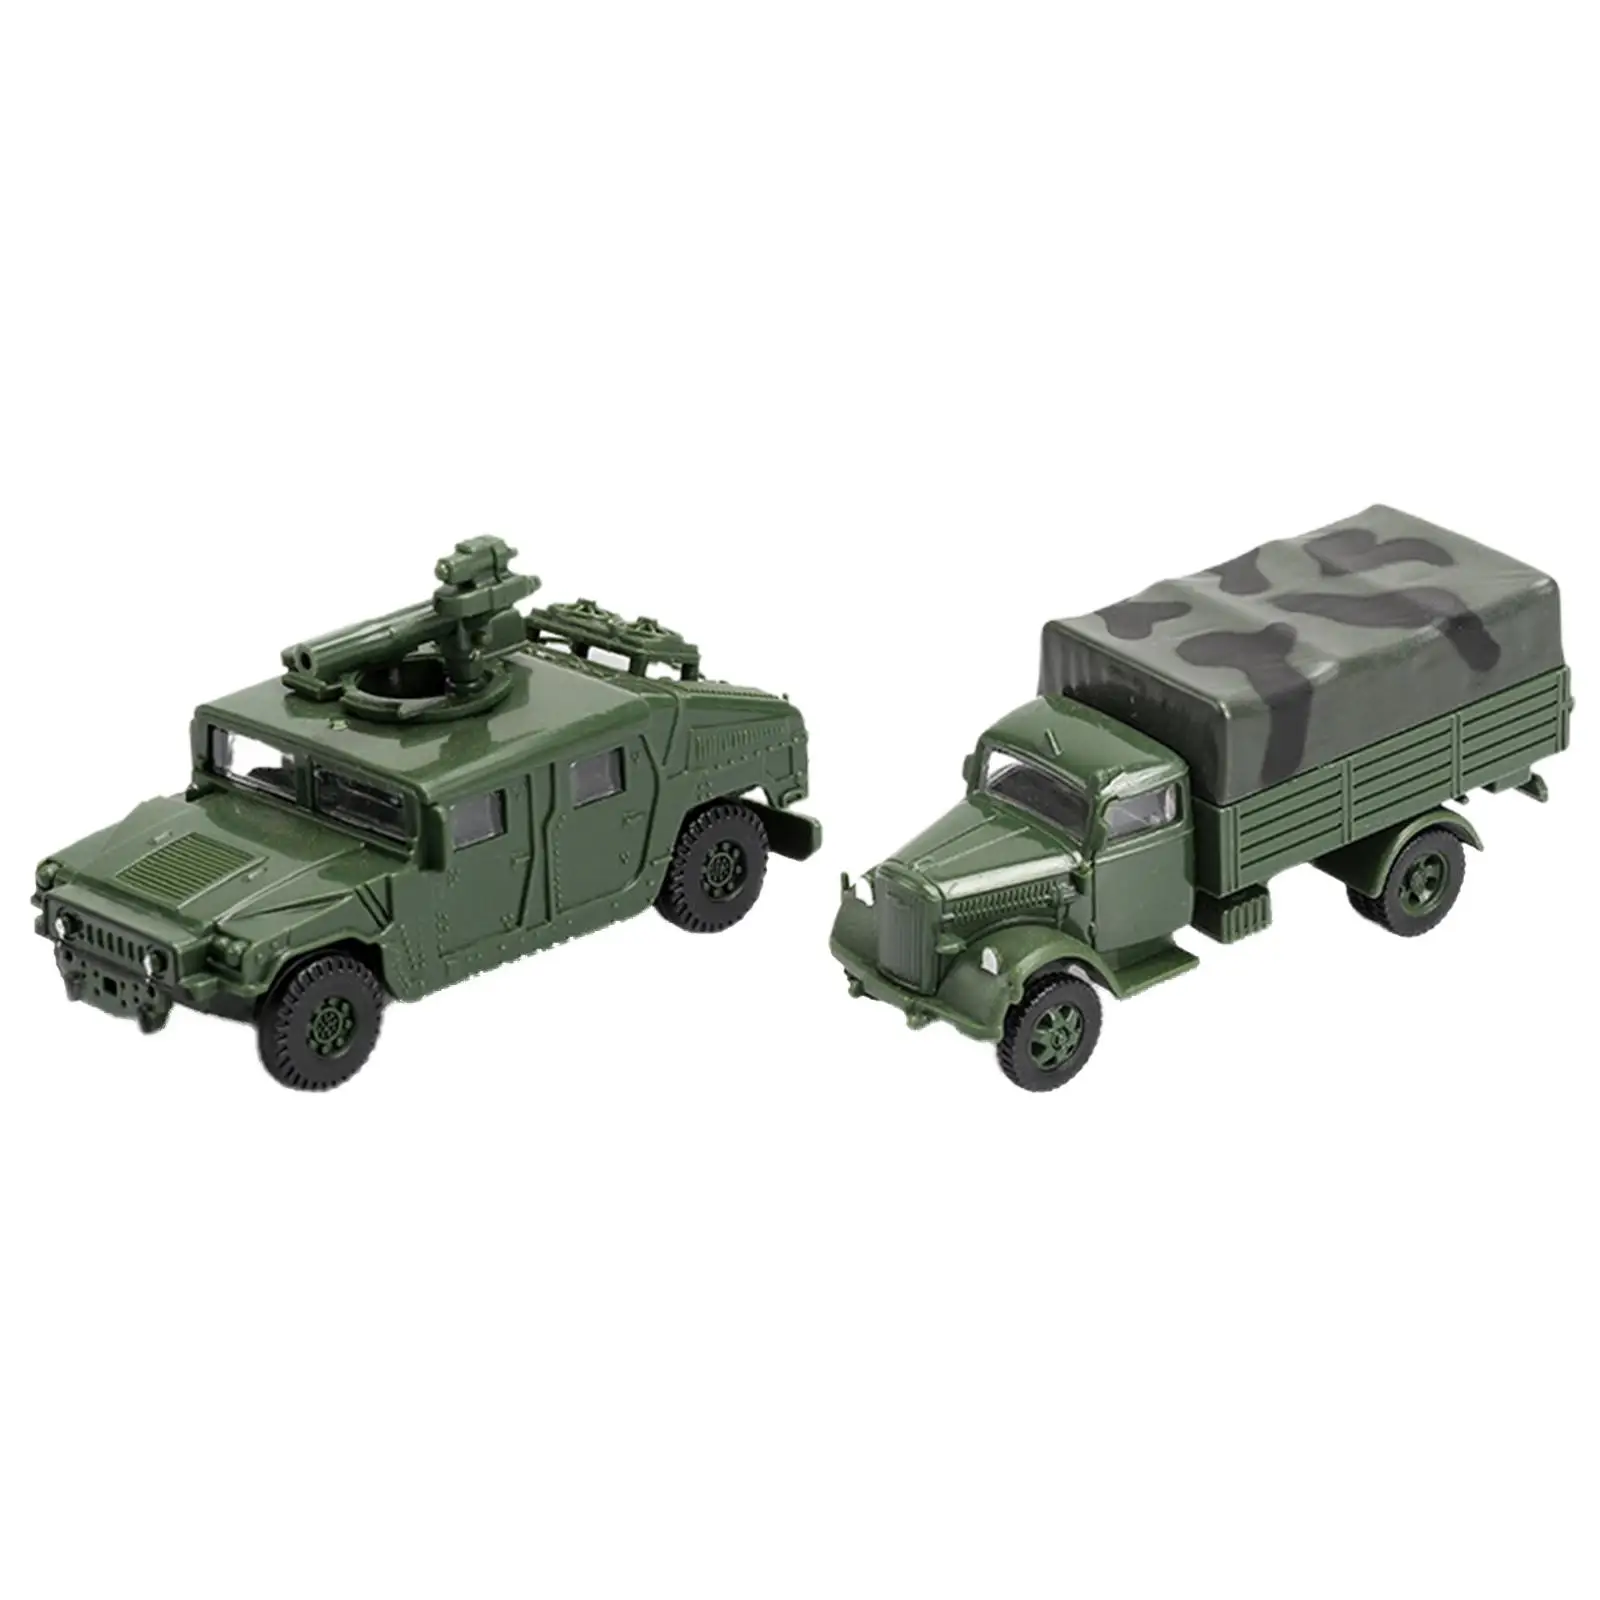 2 Pieces 1:72 Assemble American Humvee Kits Architecture Model for Tabletop